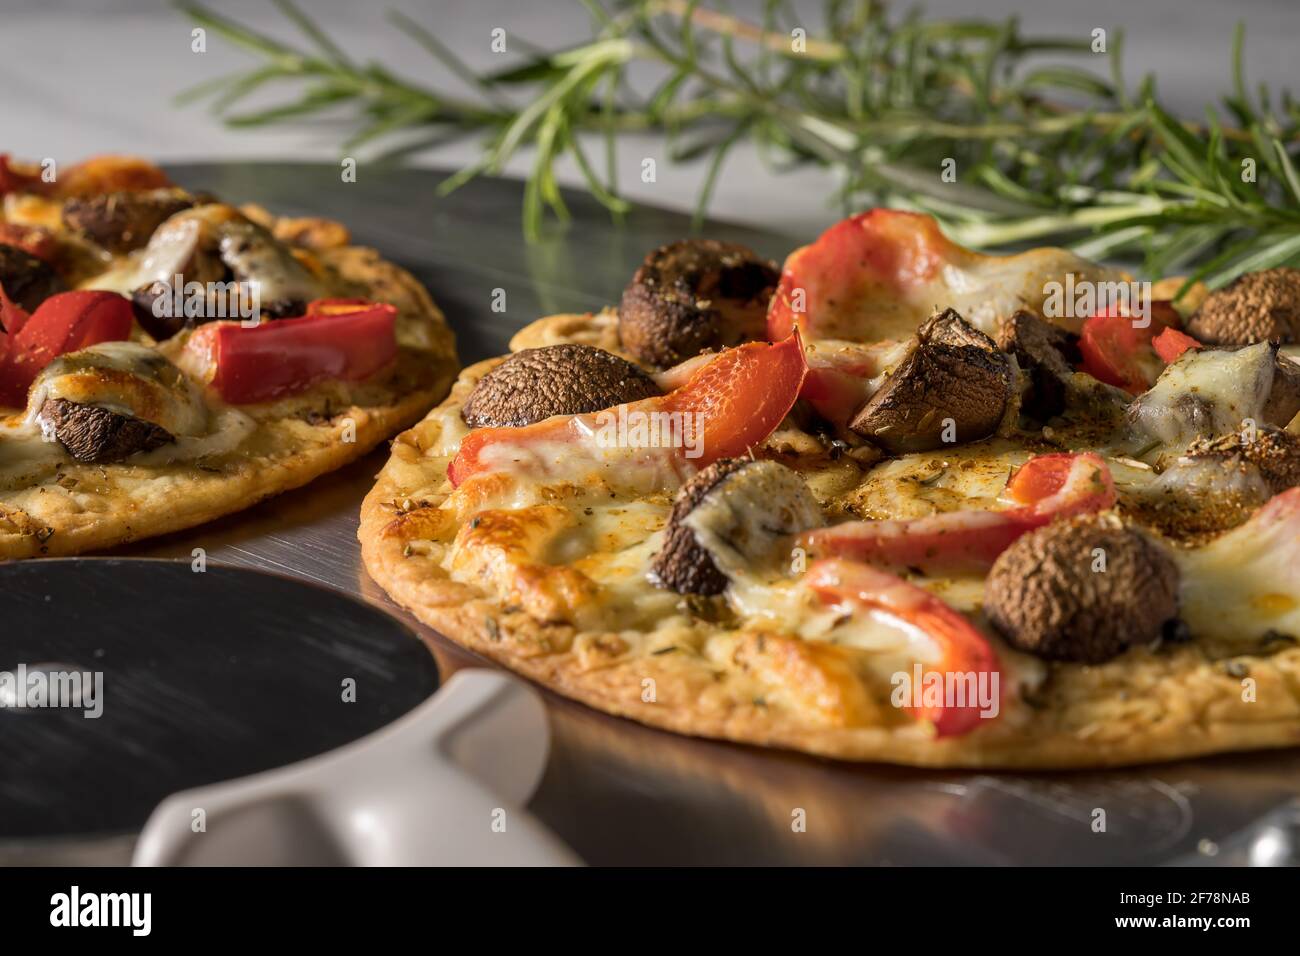 Vegetarian pita pizza. Flatbread with mushrooms, mozzarella cheese and red peppers. Stock Photo